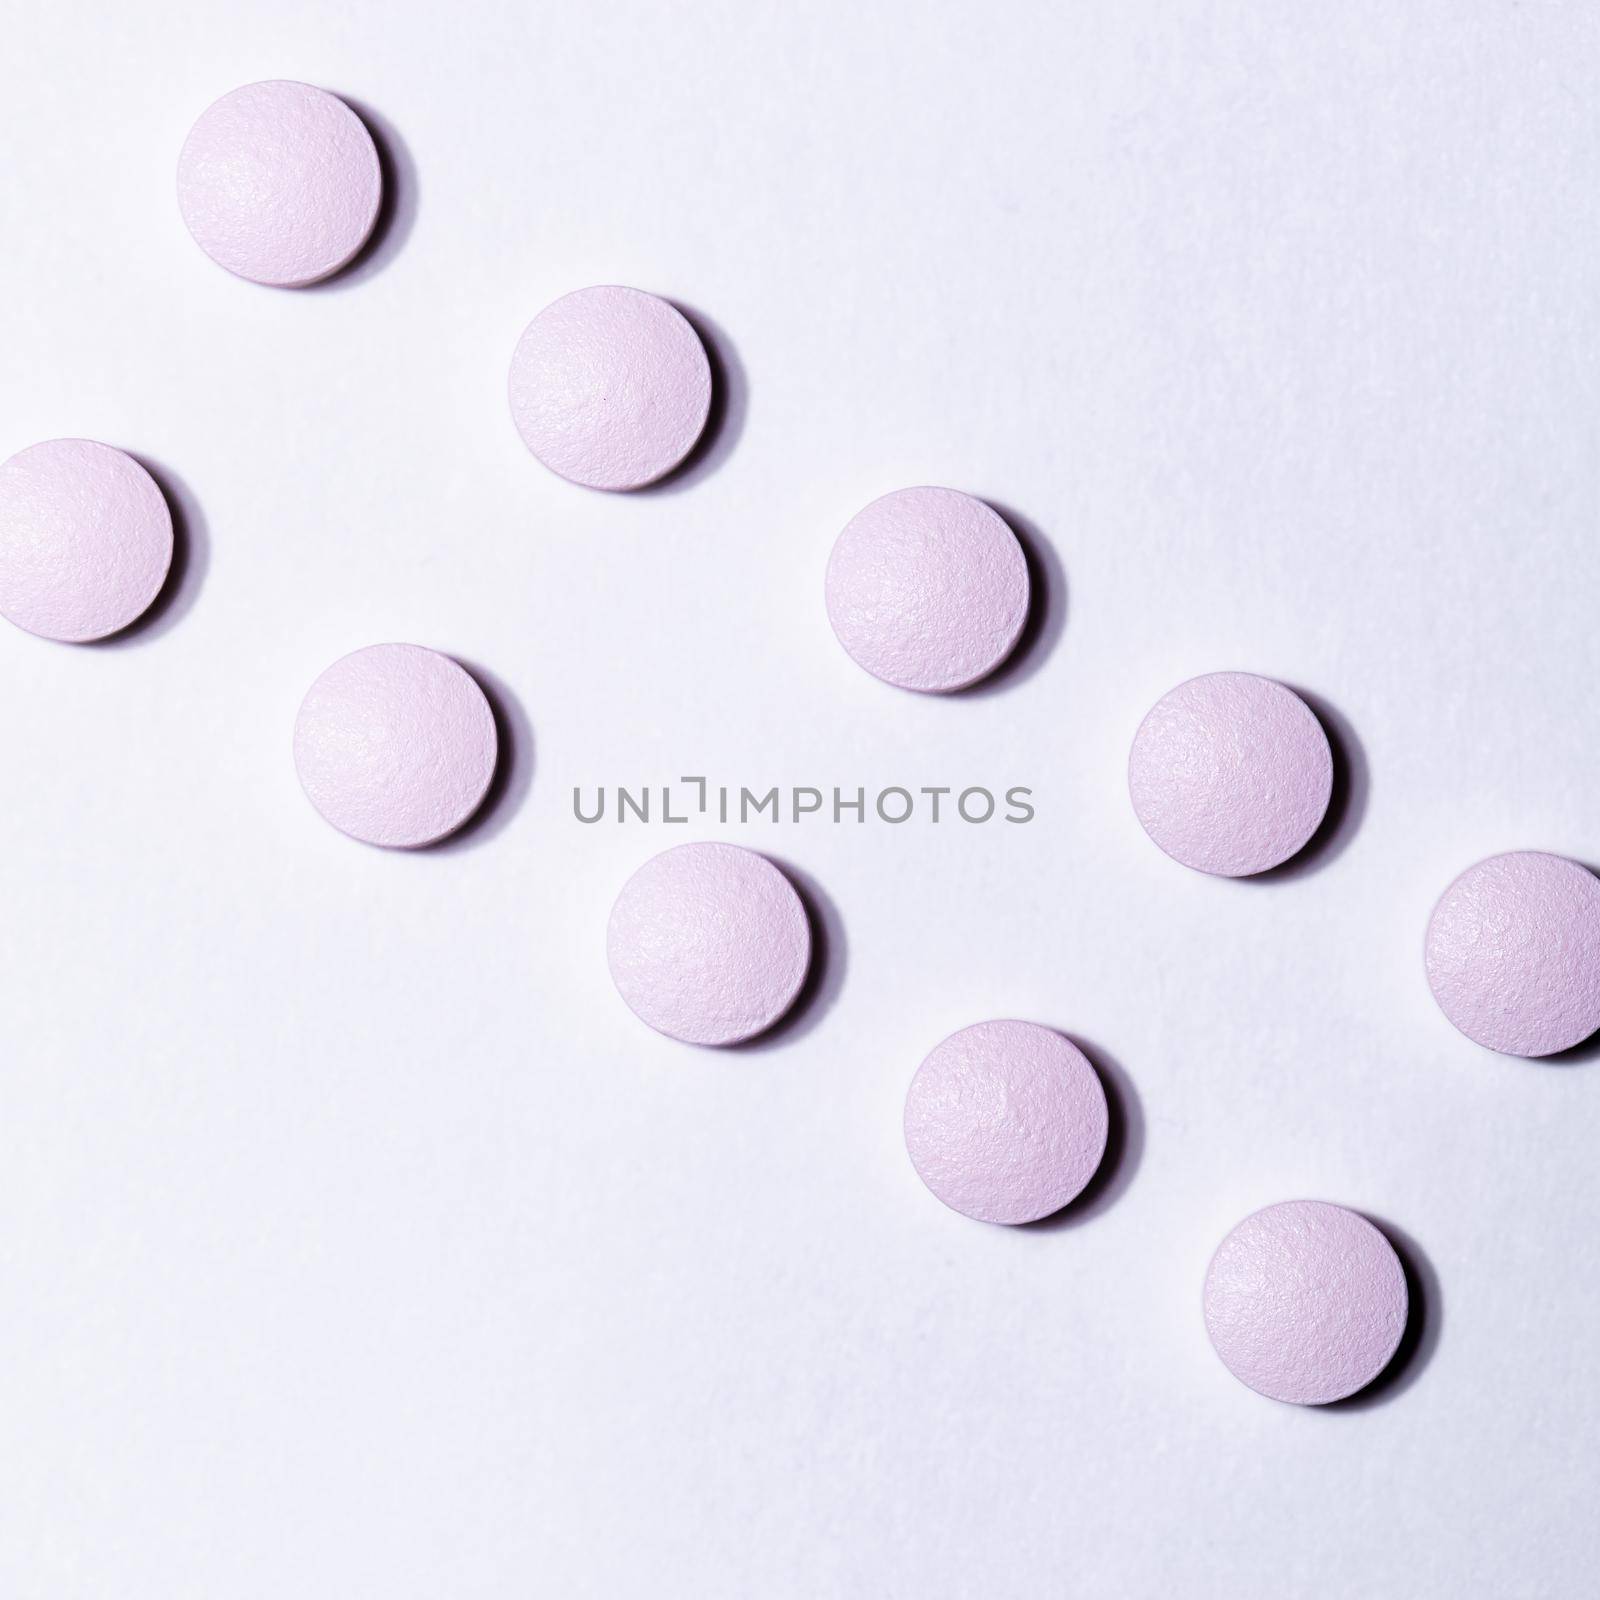 close up. packaging of tablets on a light background. by SmartPhotoLab